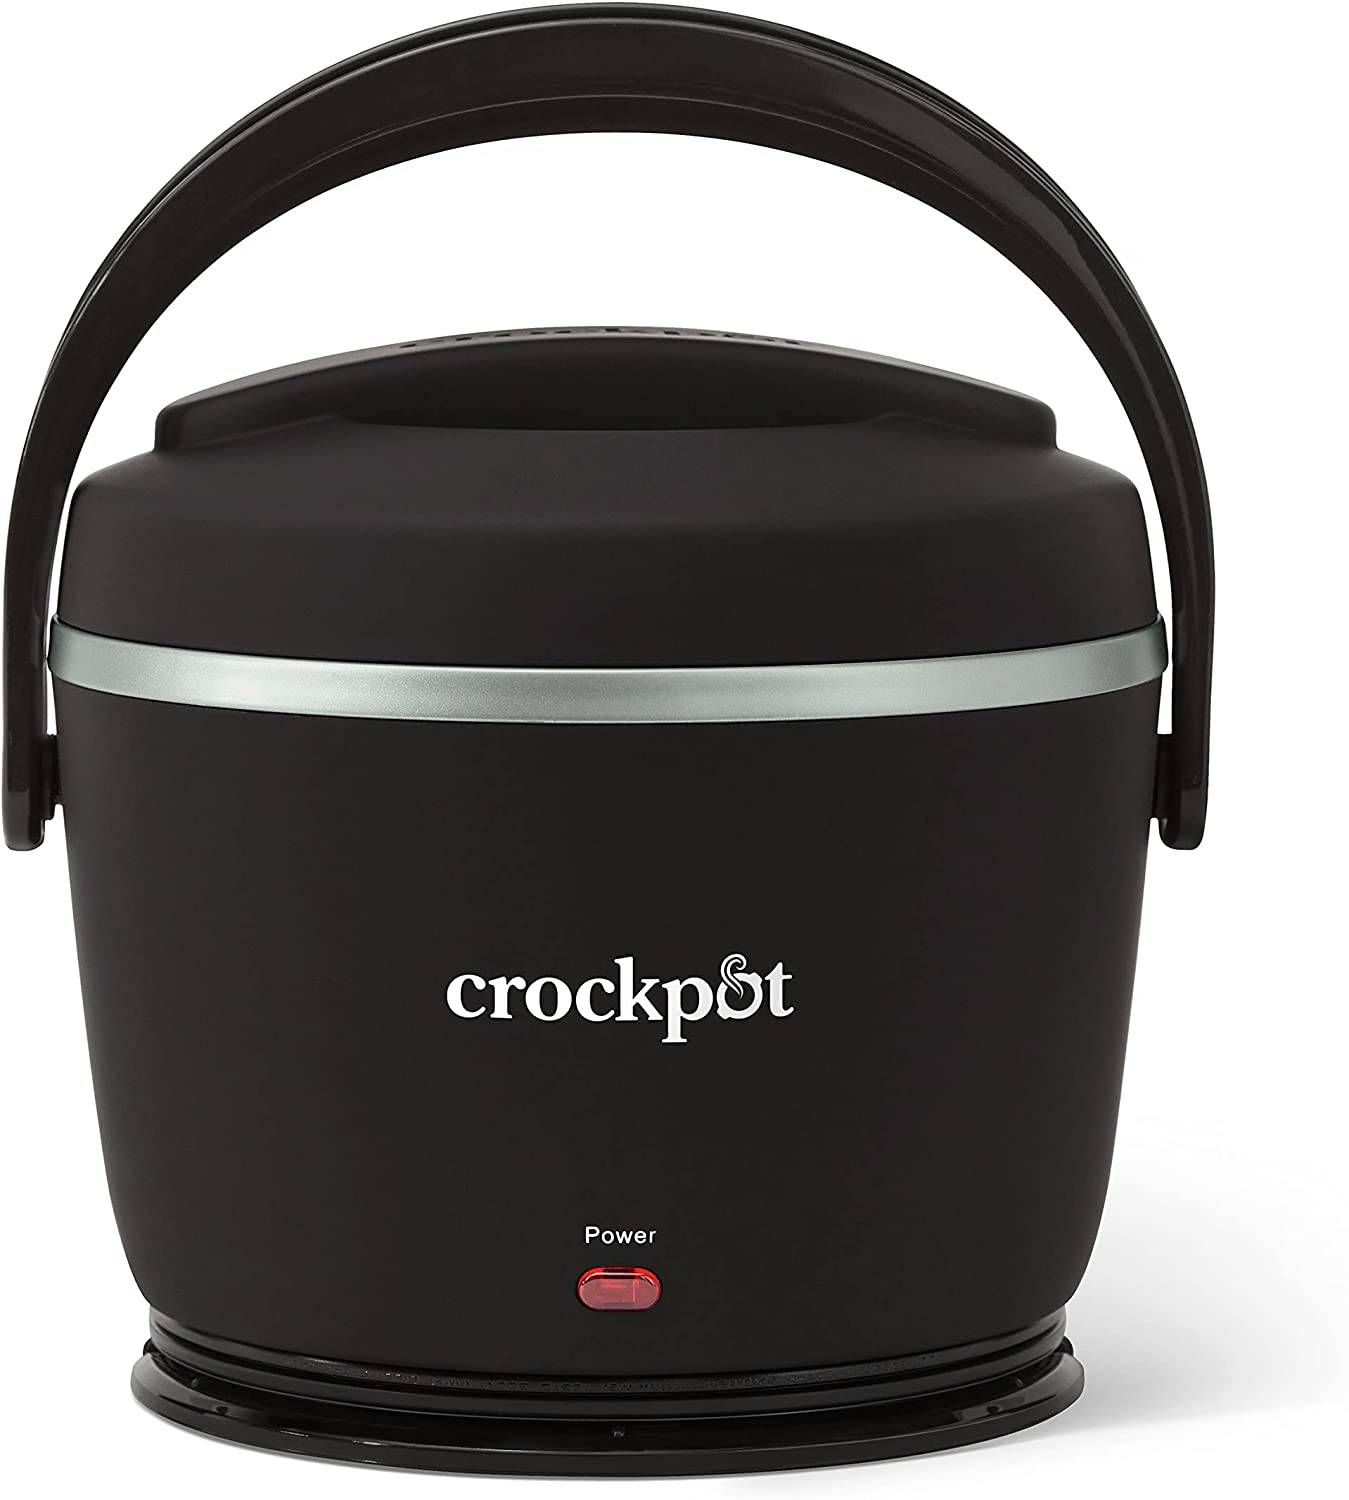 20-Oz Crockpot Lunch Crock Electric Portable Food Warmer (Black, Faded Blue, Blush Pink) $30 & More + Free Shipping